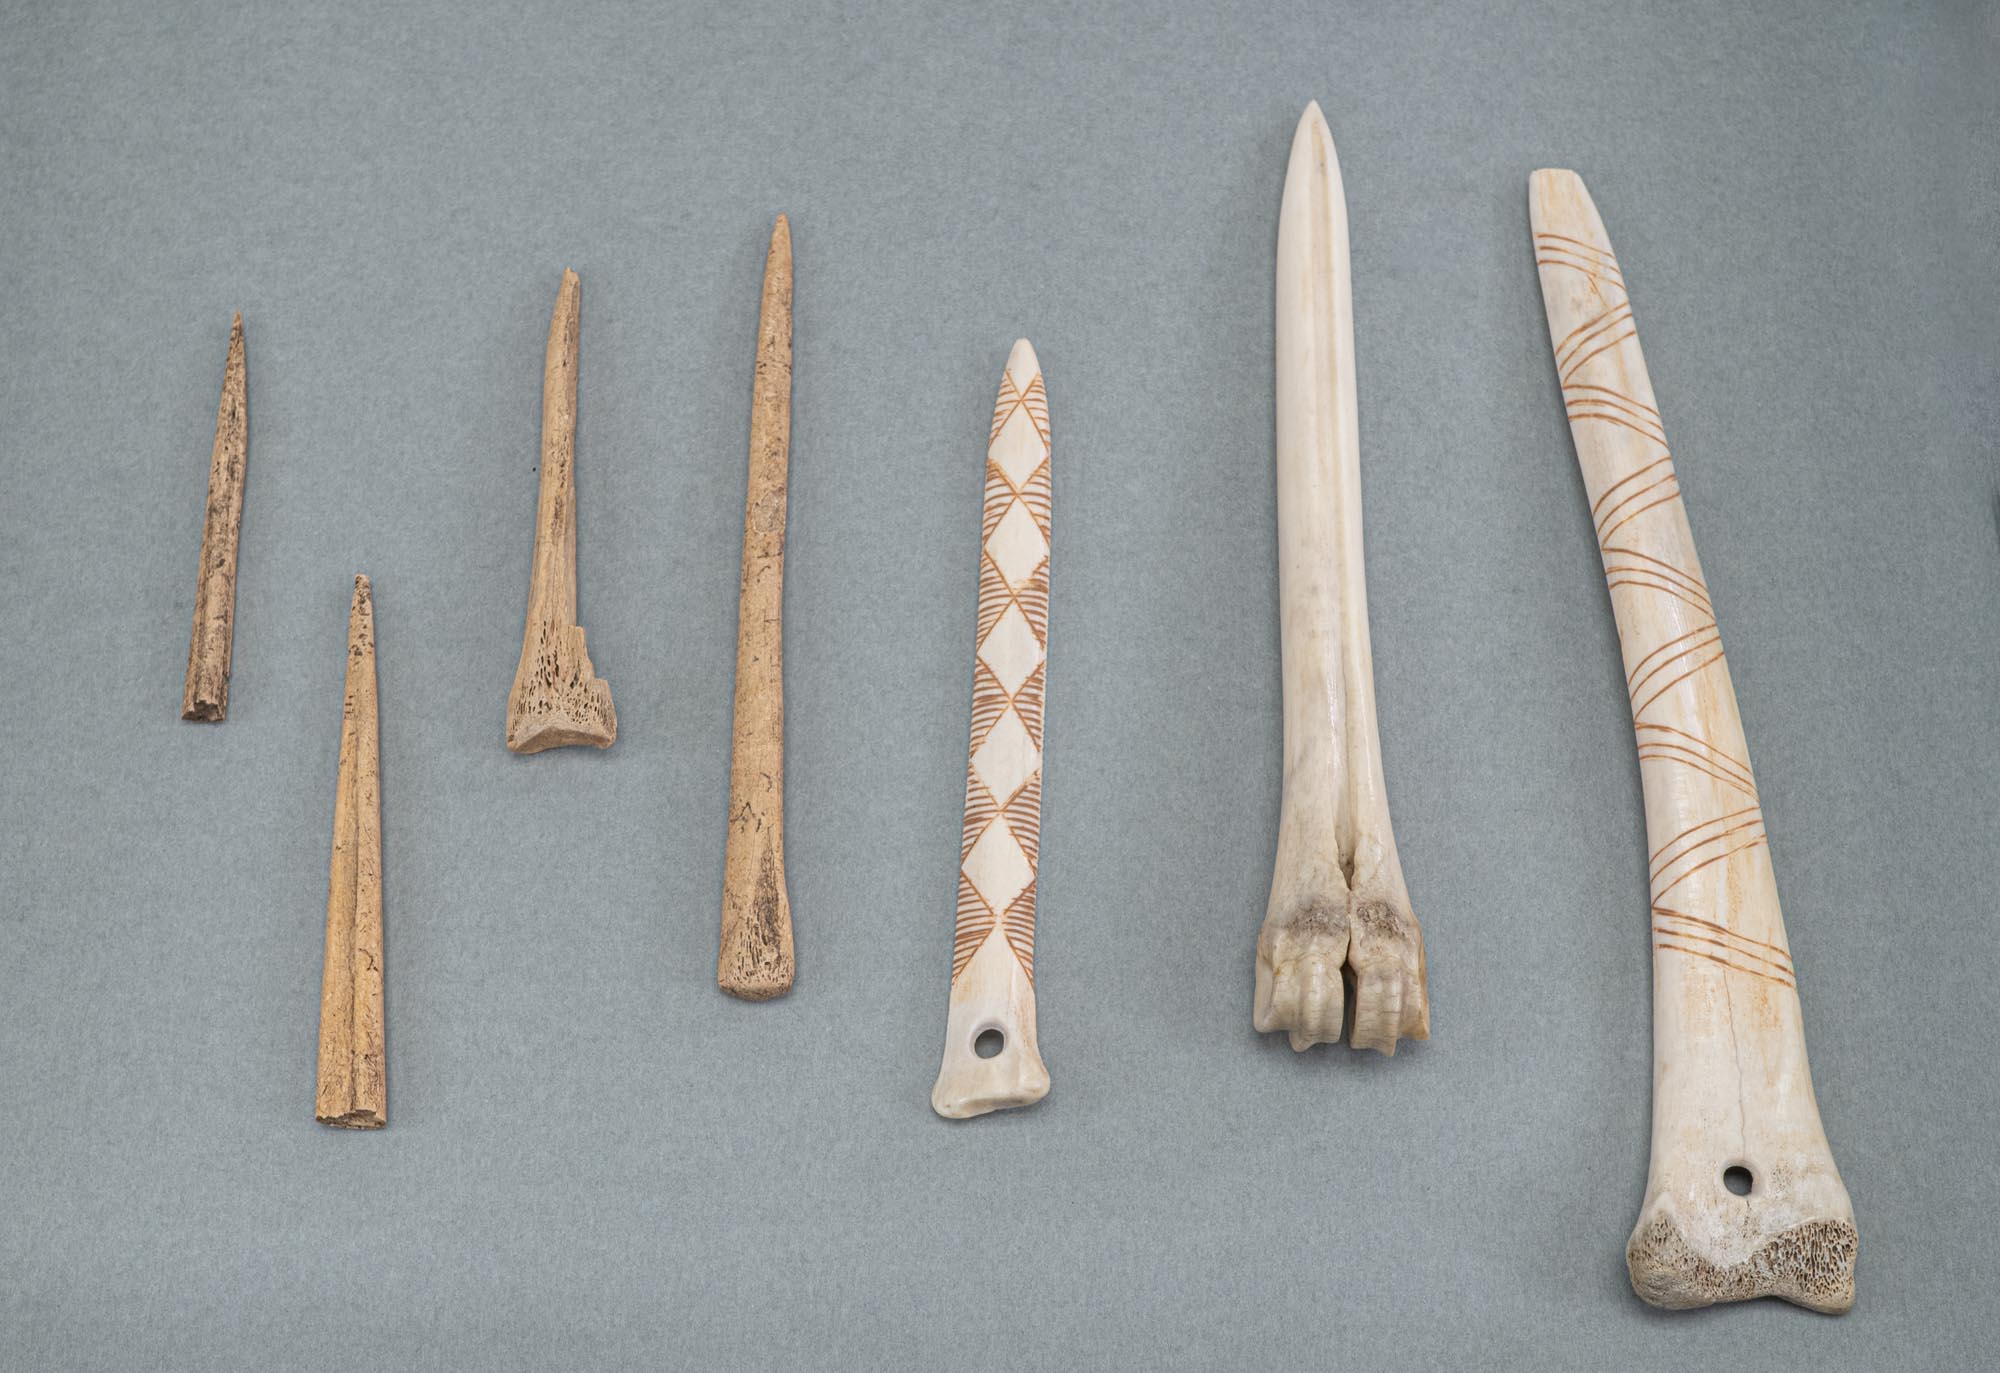 Bone tools have been in use since the dawn of human civilization. An awl is a pointed tool usually shaped from a long bone splinter. They were used for many purposes, but especially as aids in making baskets and for perforating worked hides.